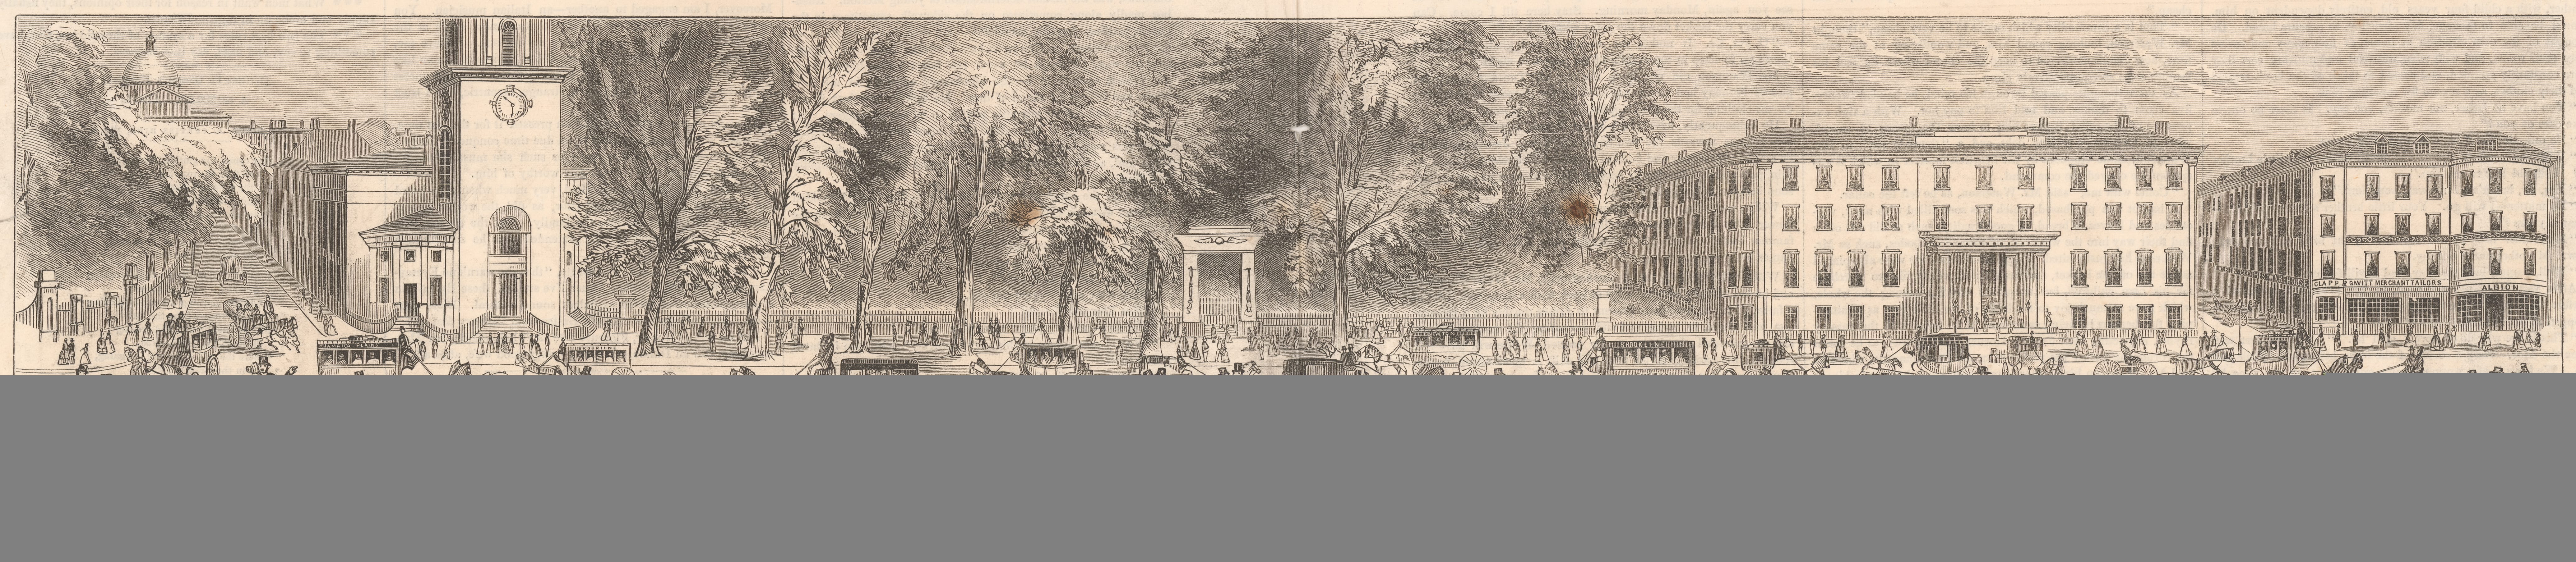 Image of Detail from “Grand Panoramic View of Tremont Street, Boston, East and West Sides From Court Street to the Common”